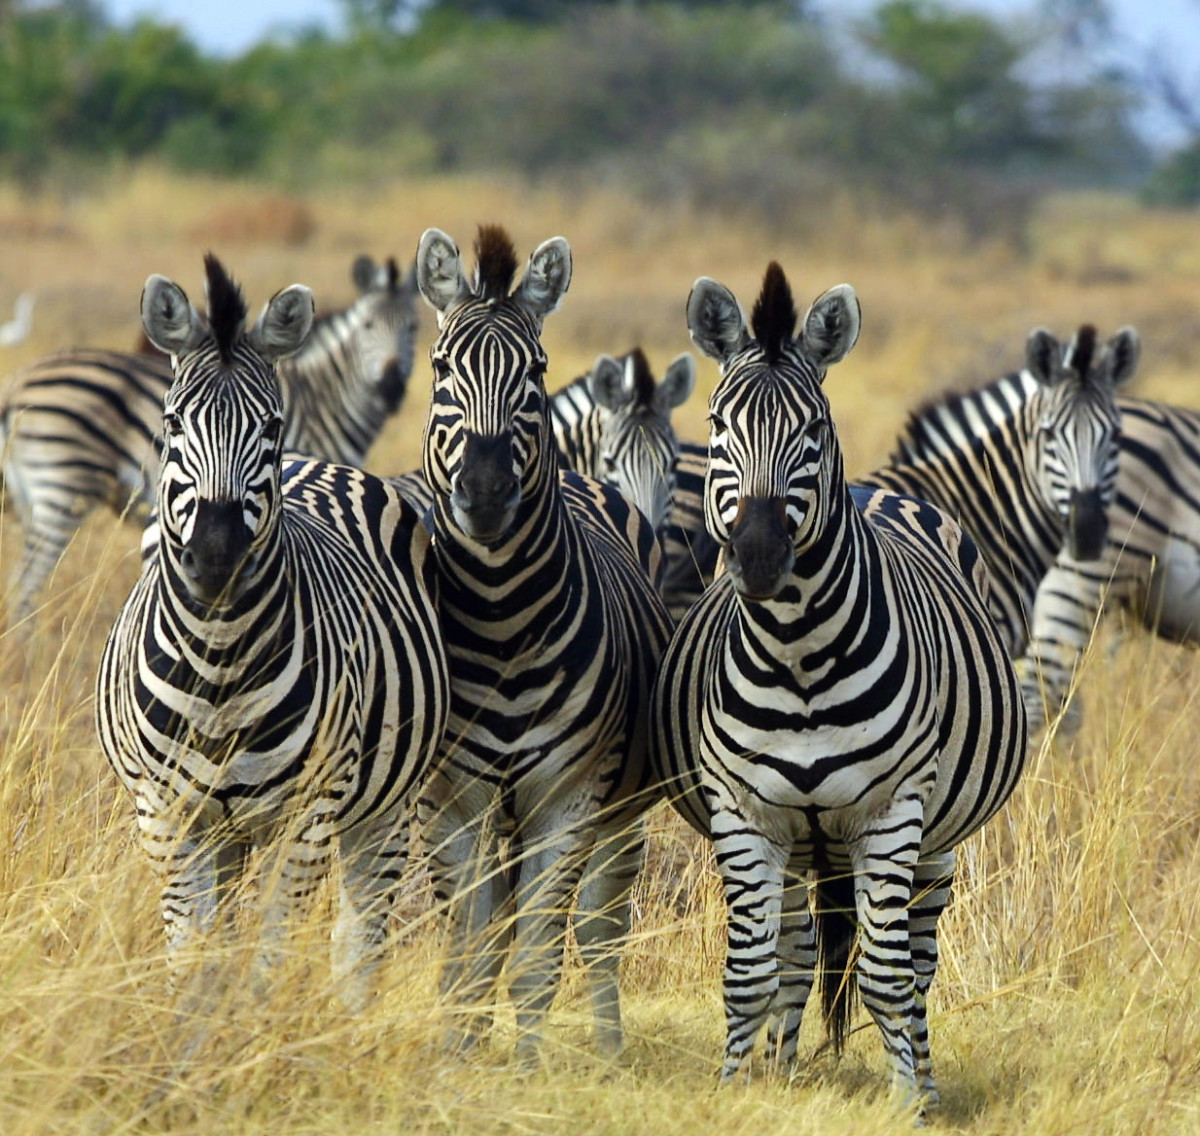 The zebra may be the most iconic black and white animal.